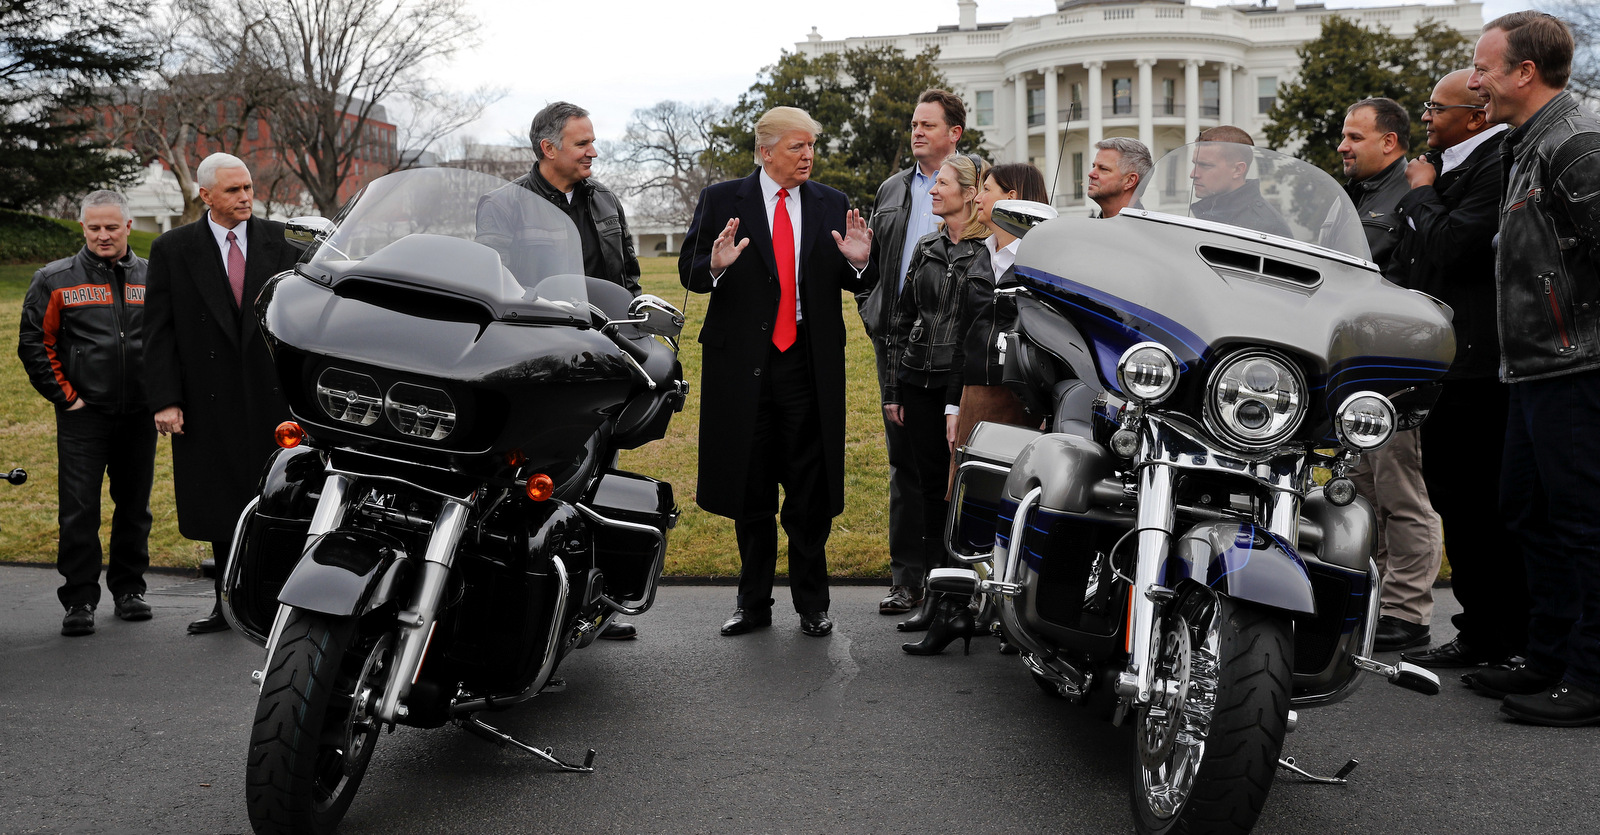 President Donald Trump and Vice President Mike Pence meet with Harley Davidson executives and Union Representatives on the South Lawn of the White House in Washington, Feb. 2, 2017. AP | Pablo Martinez Monsivais